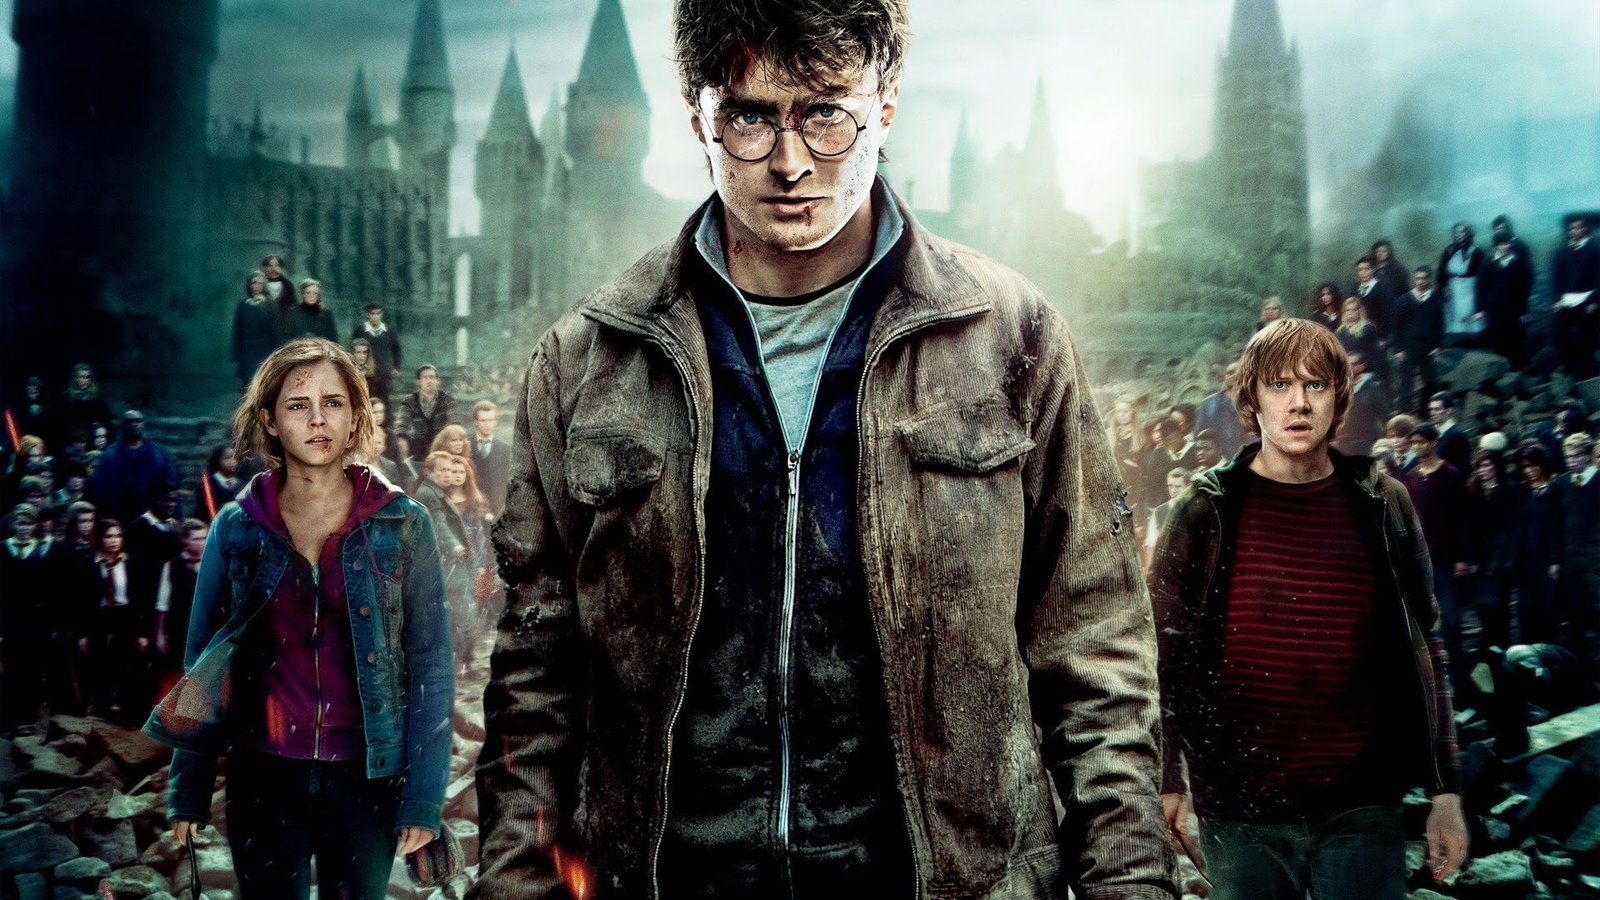  / Harry Potter and the Deathly Hallows: Part 2